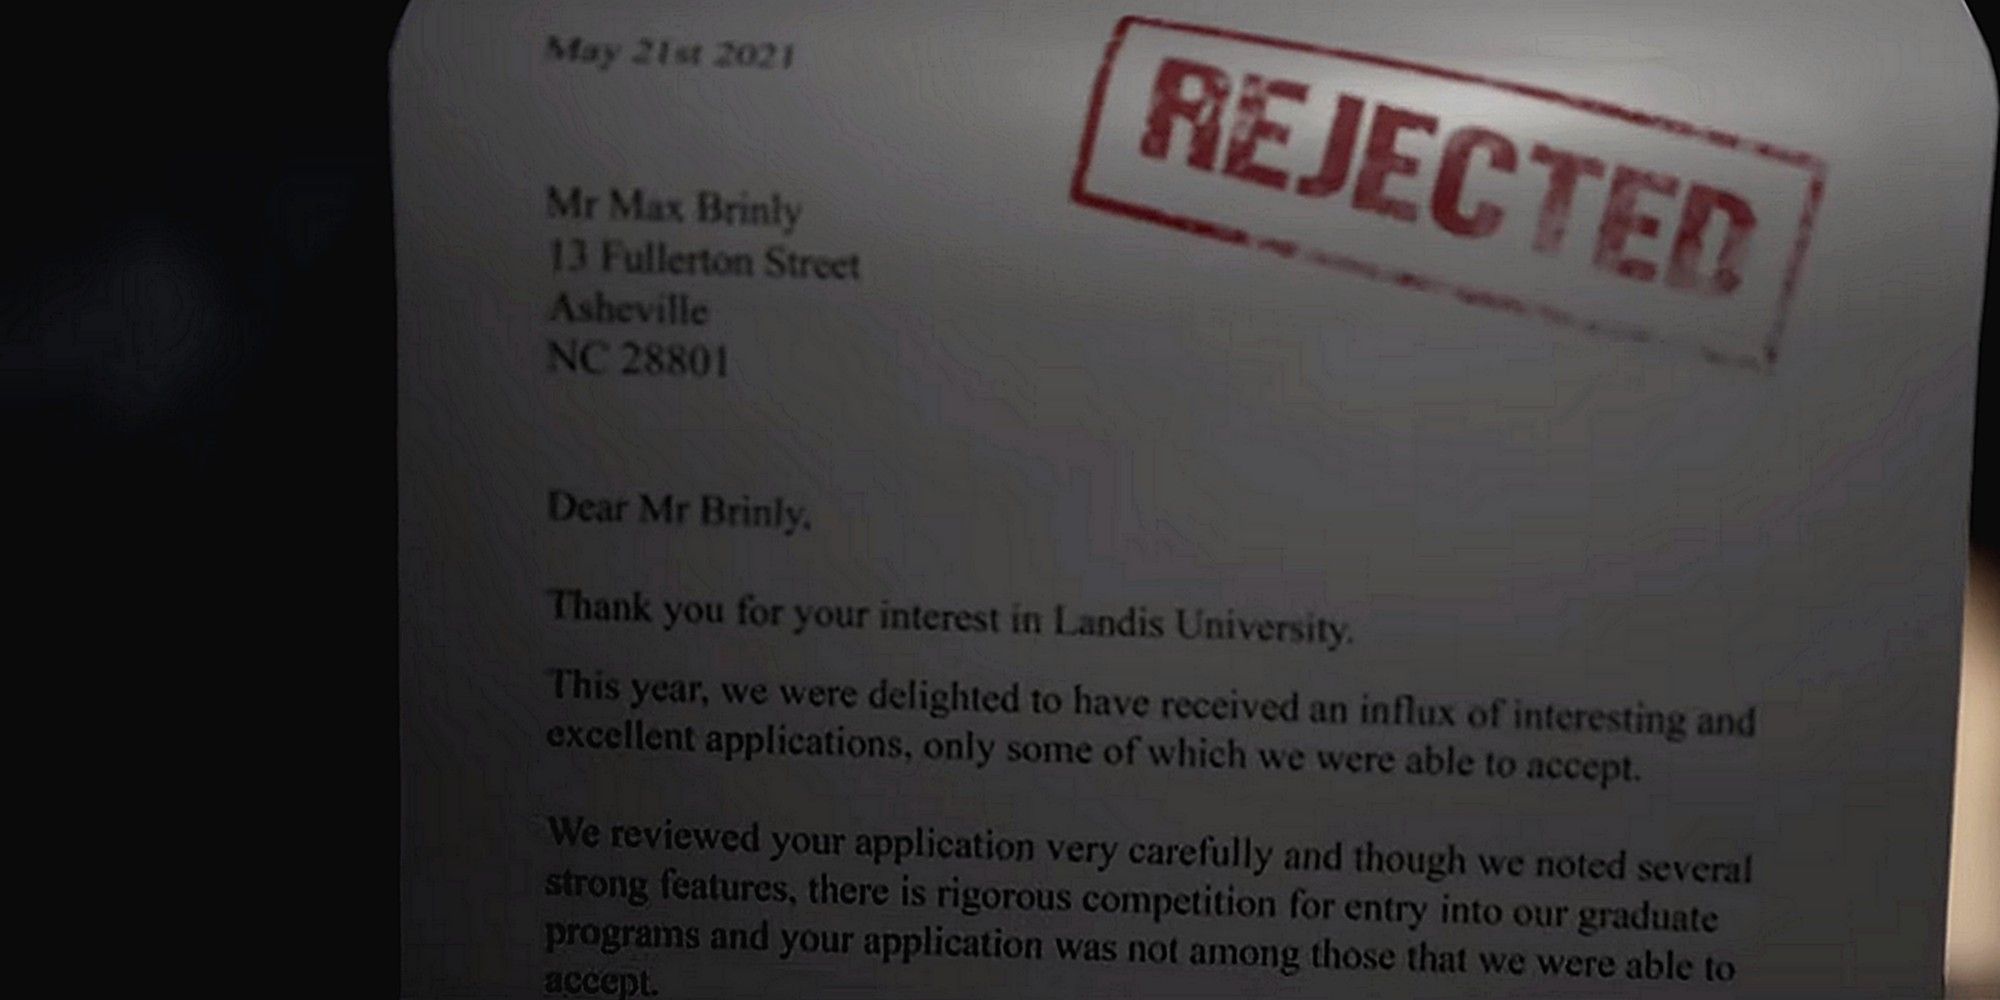 Max's rejection letter from The Quarry